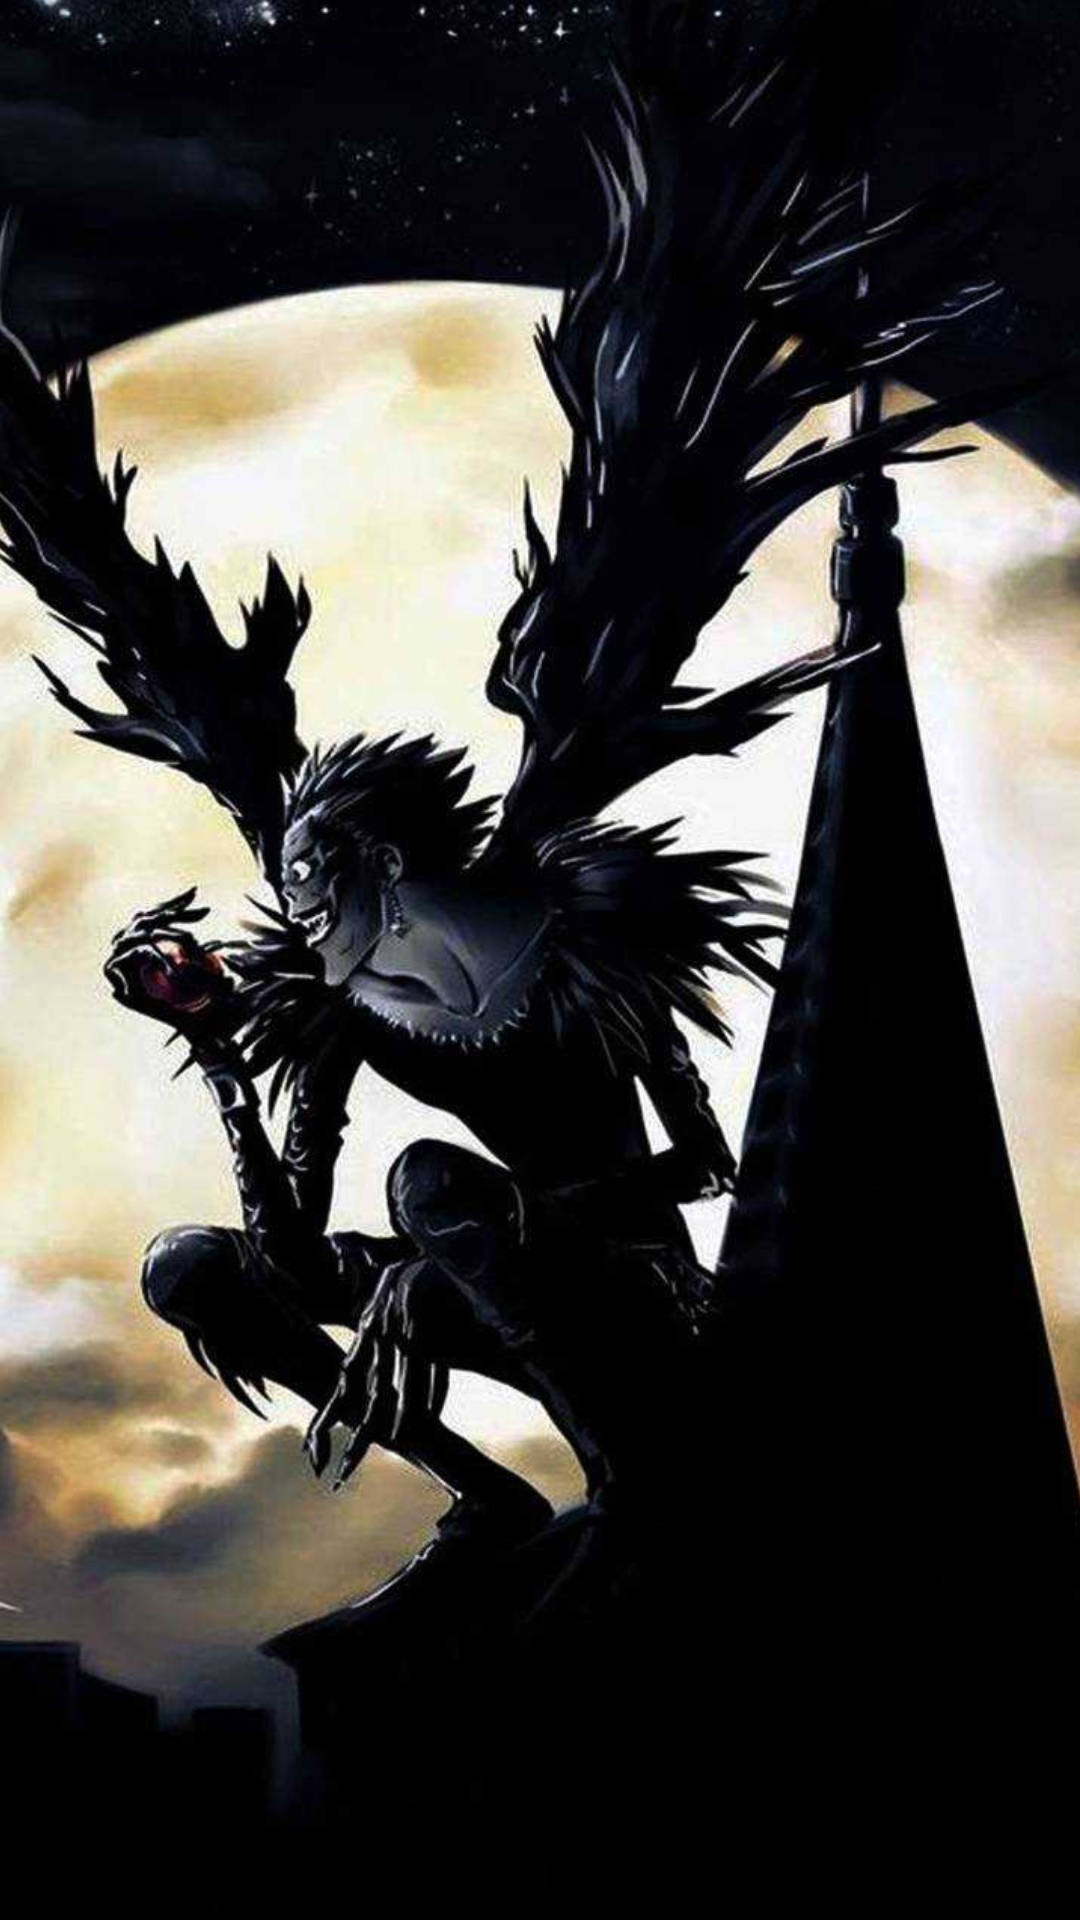 Full Moon And Ryuk From Death Note Iphone Background